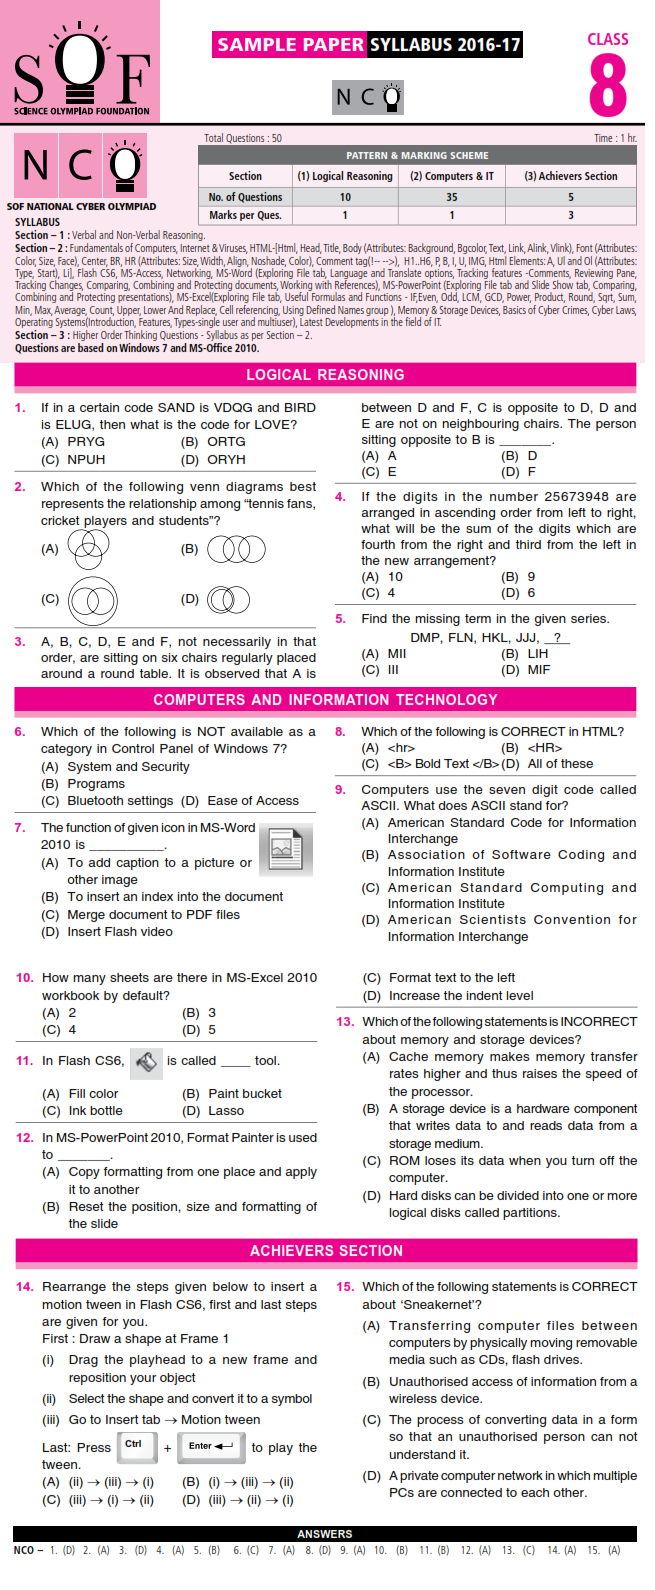 Science olympiad question paper